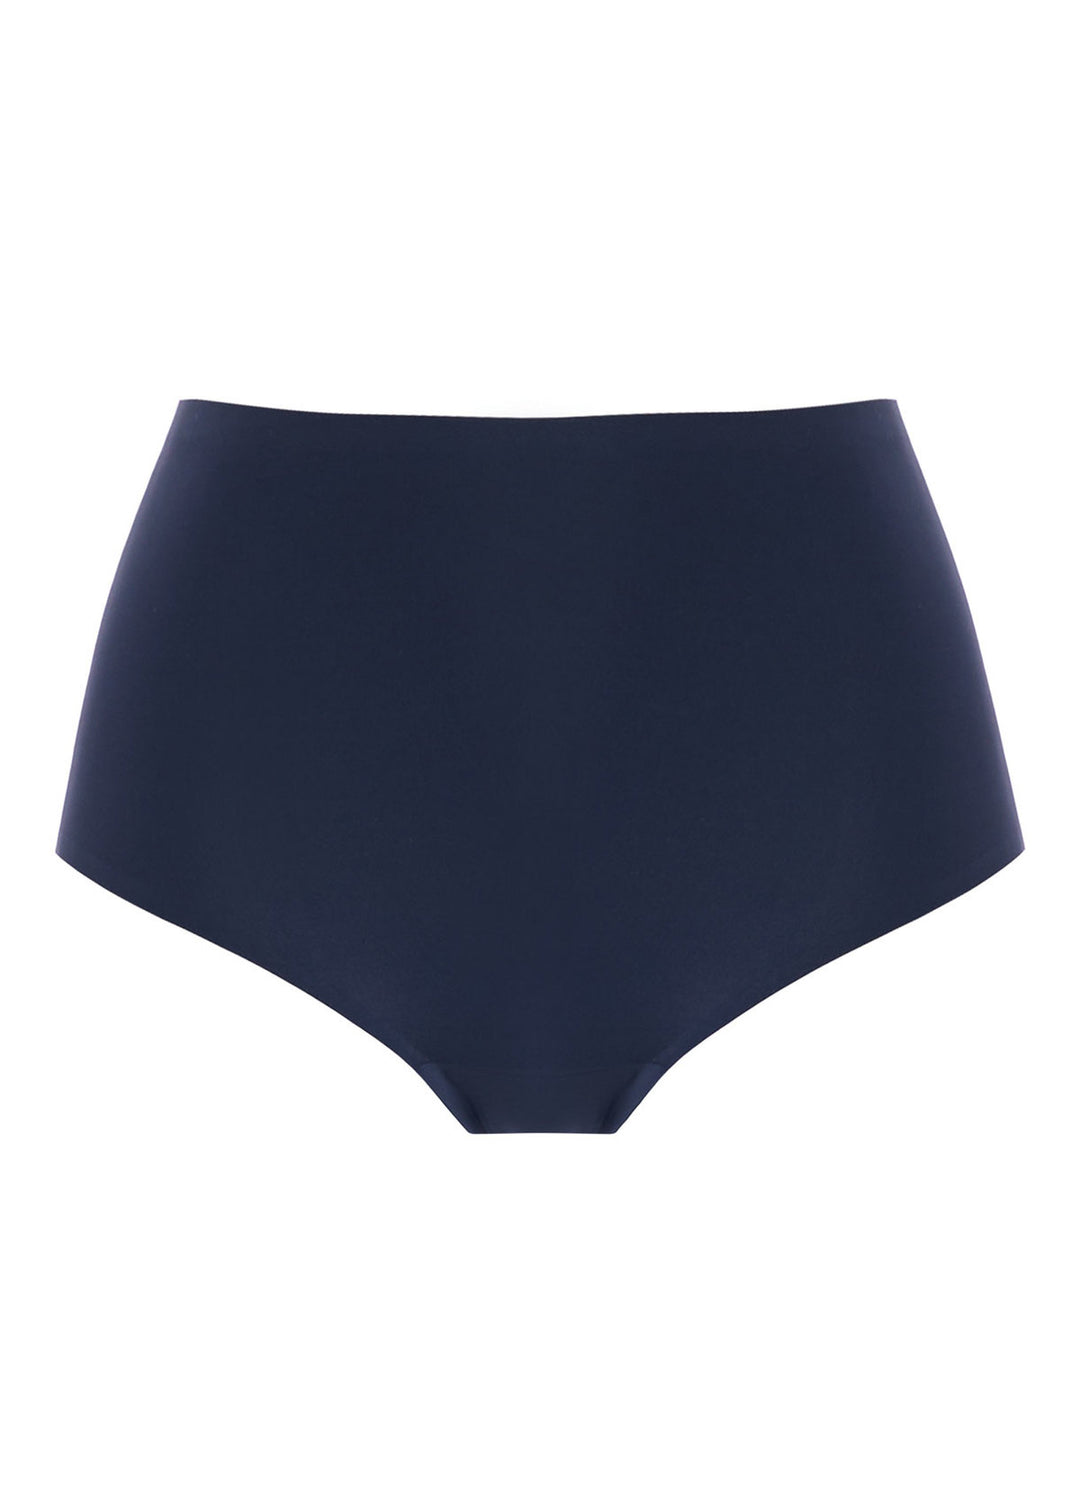 NAVY SMOOTHEASE INVISIBLE STRETCH BRIEF